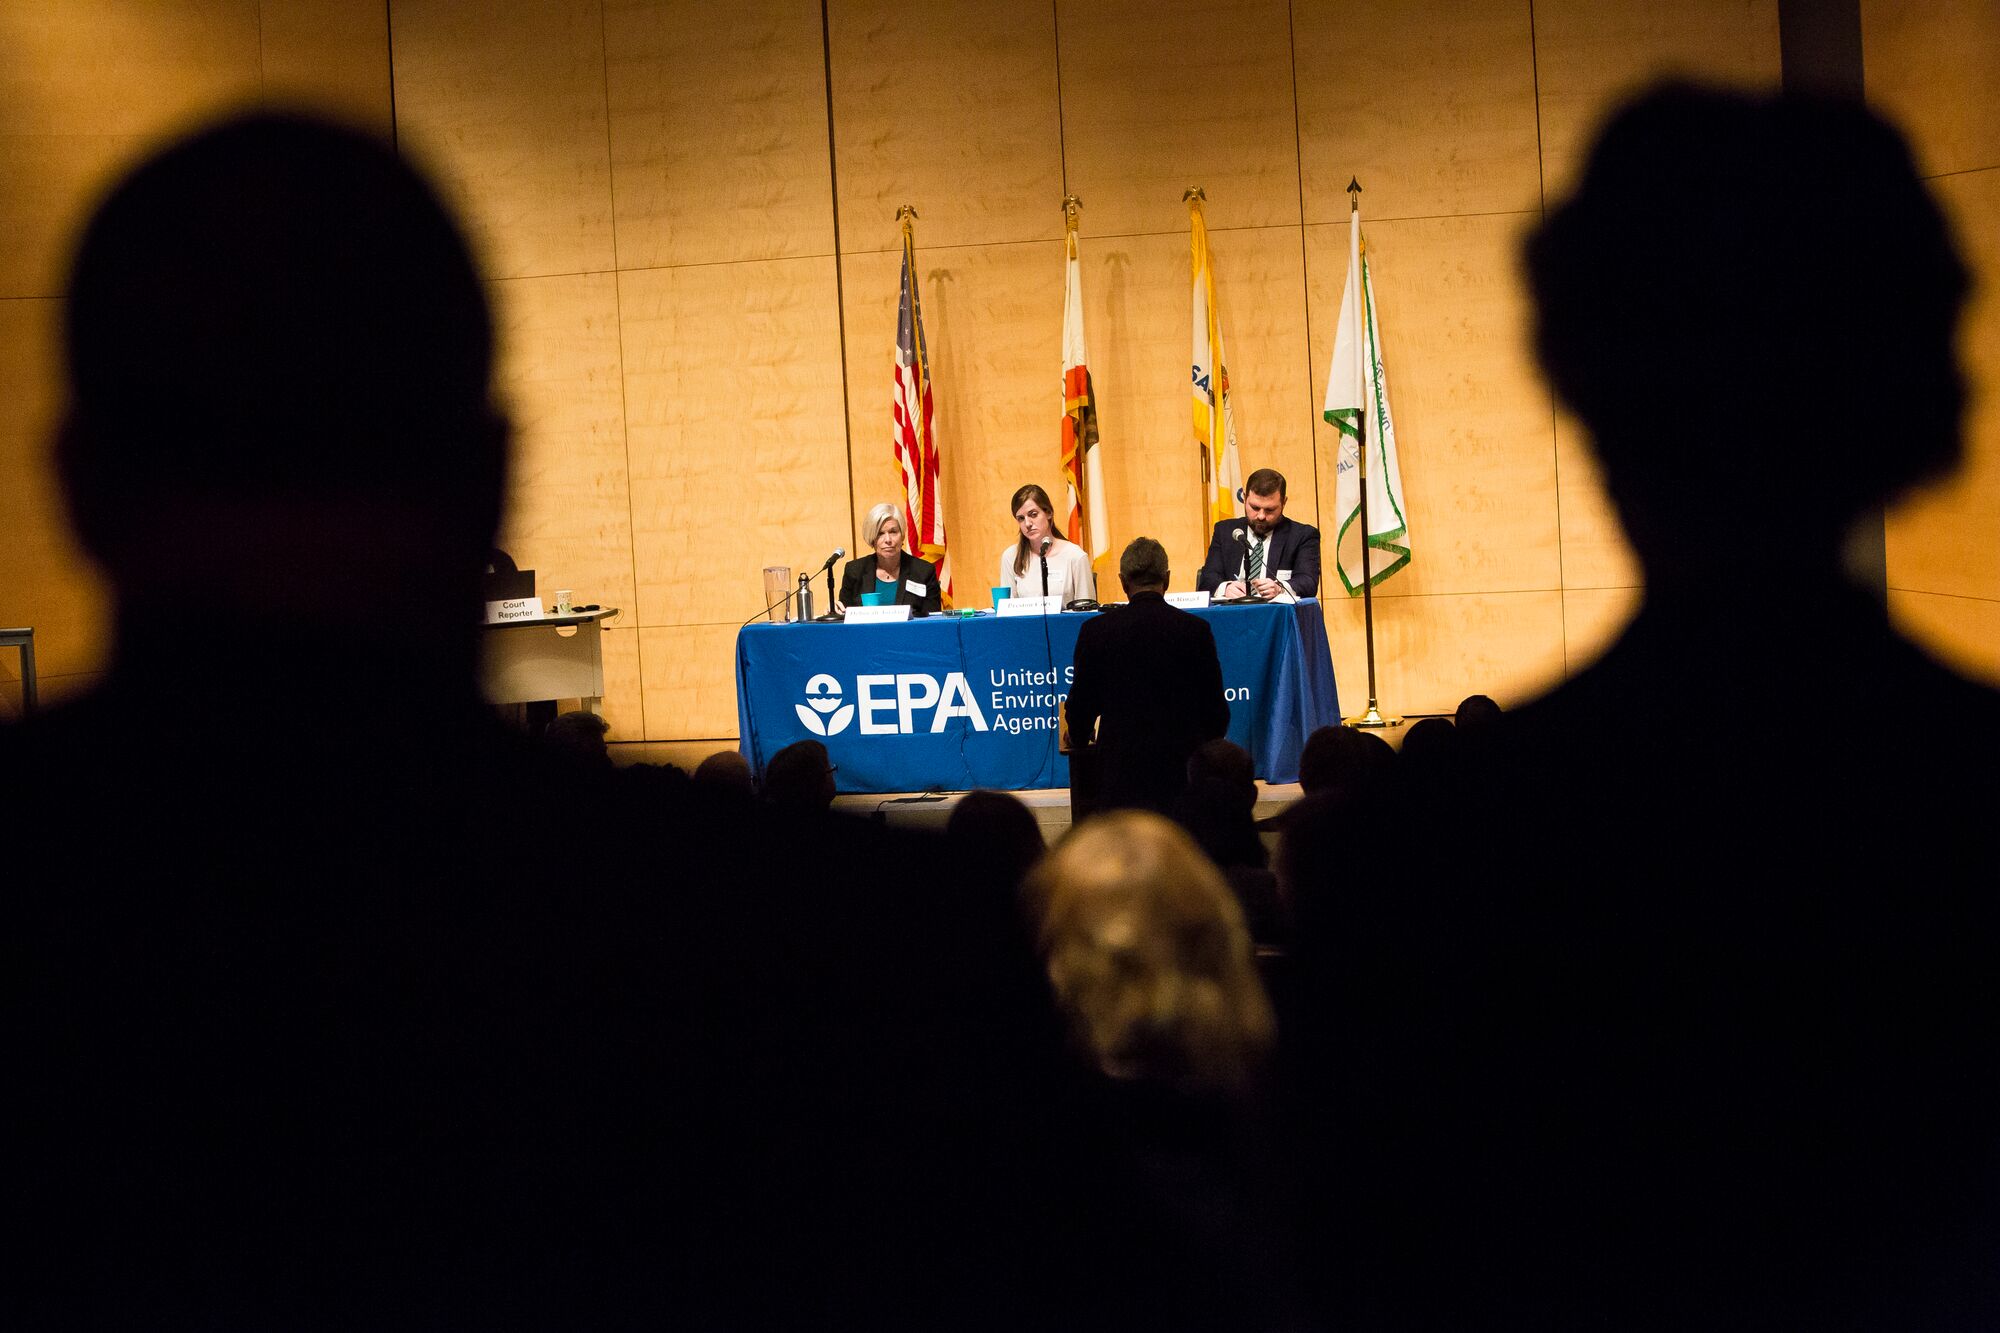 Speakers at the listening session held by the U.S. Environmental Protection Agency on the proposed repeal of the Clean Power Plan, in San Francisco on Feb. 28, 2018.